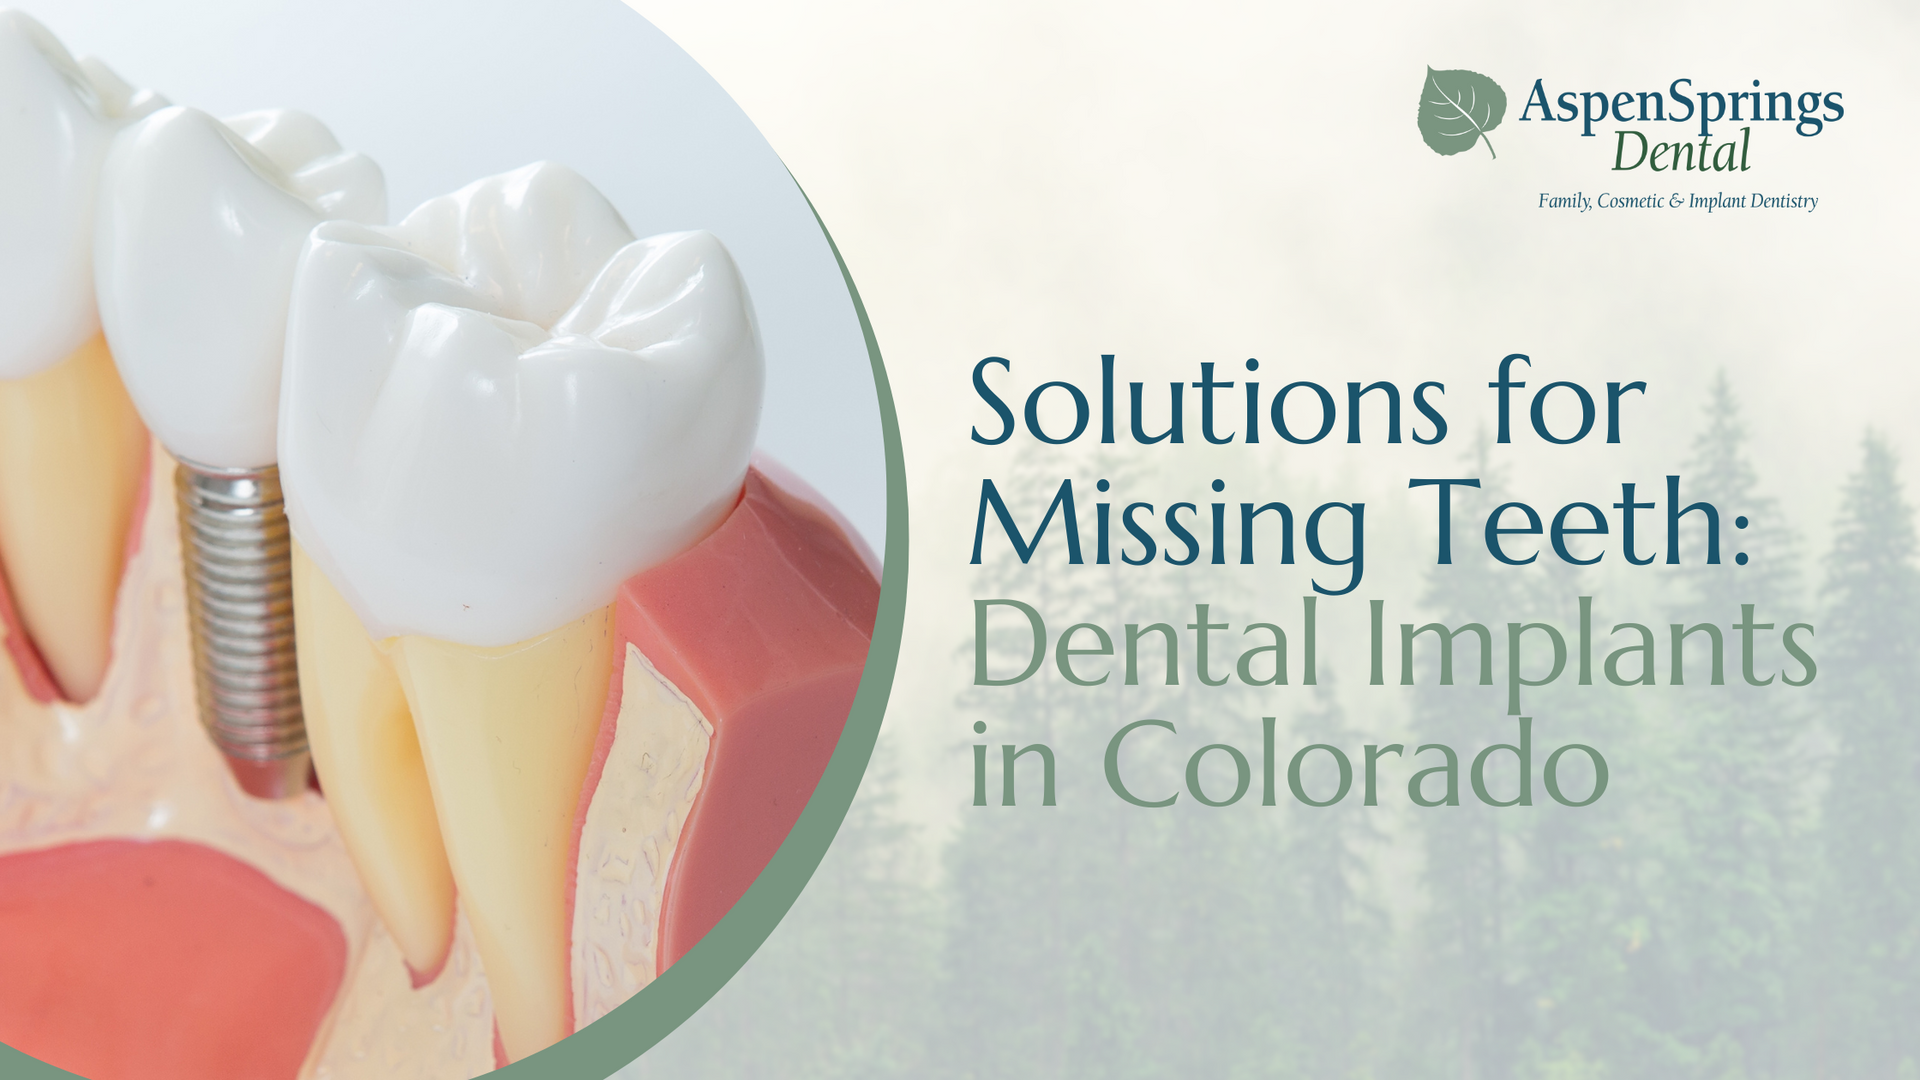 A picture of a tooth with a dental implant in colorado